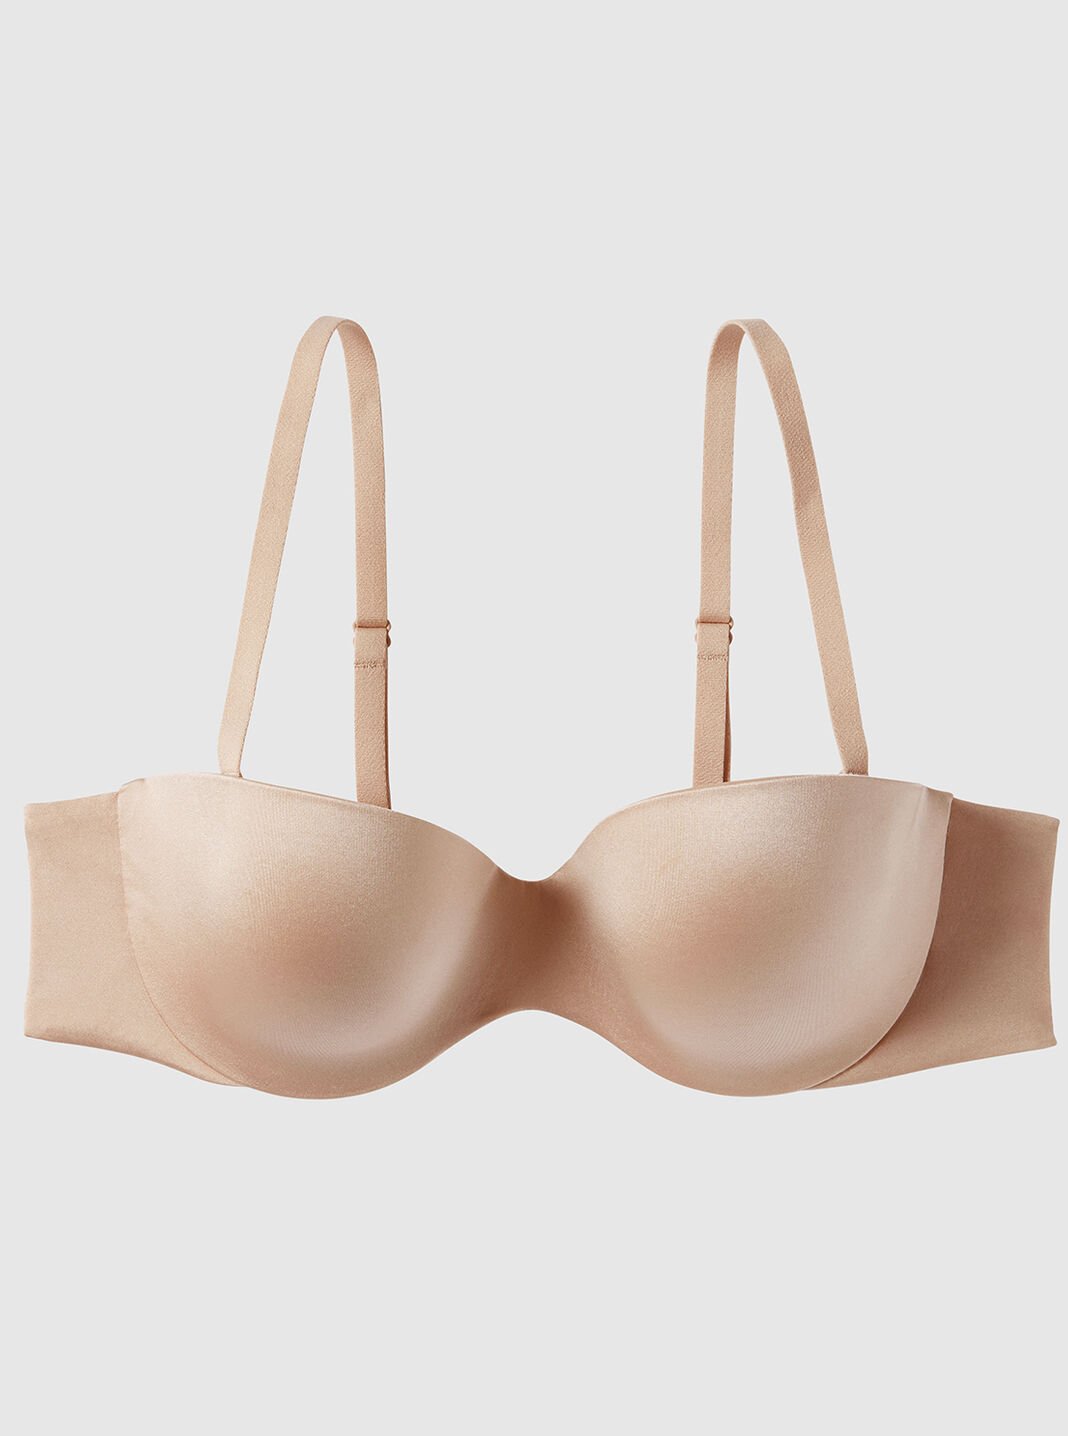 SpaNn Lucilift - Low Back Strapless Bra,Low Back Strapless Push Up